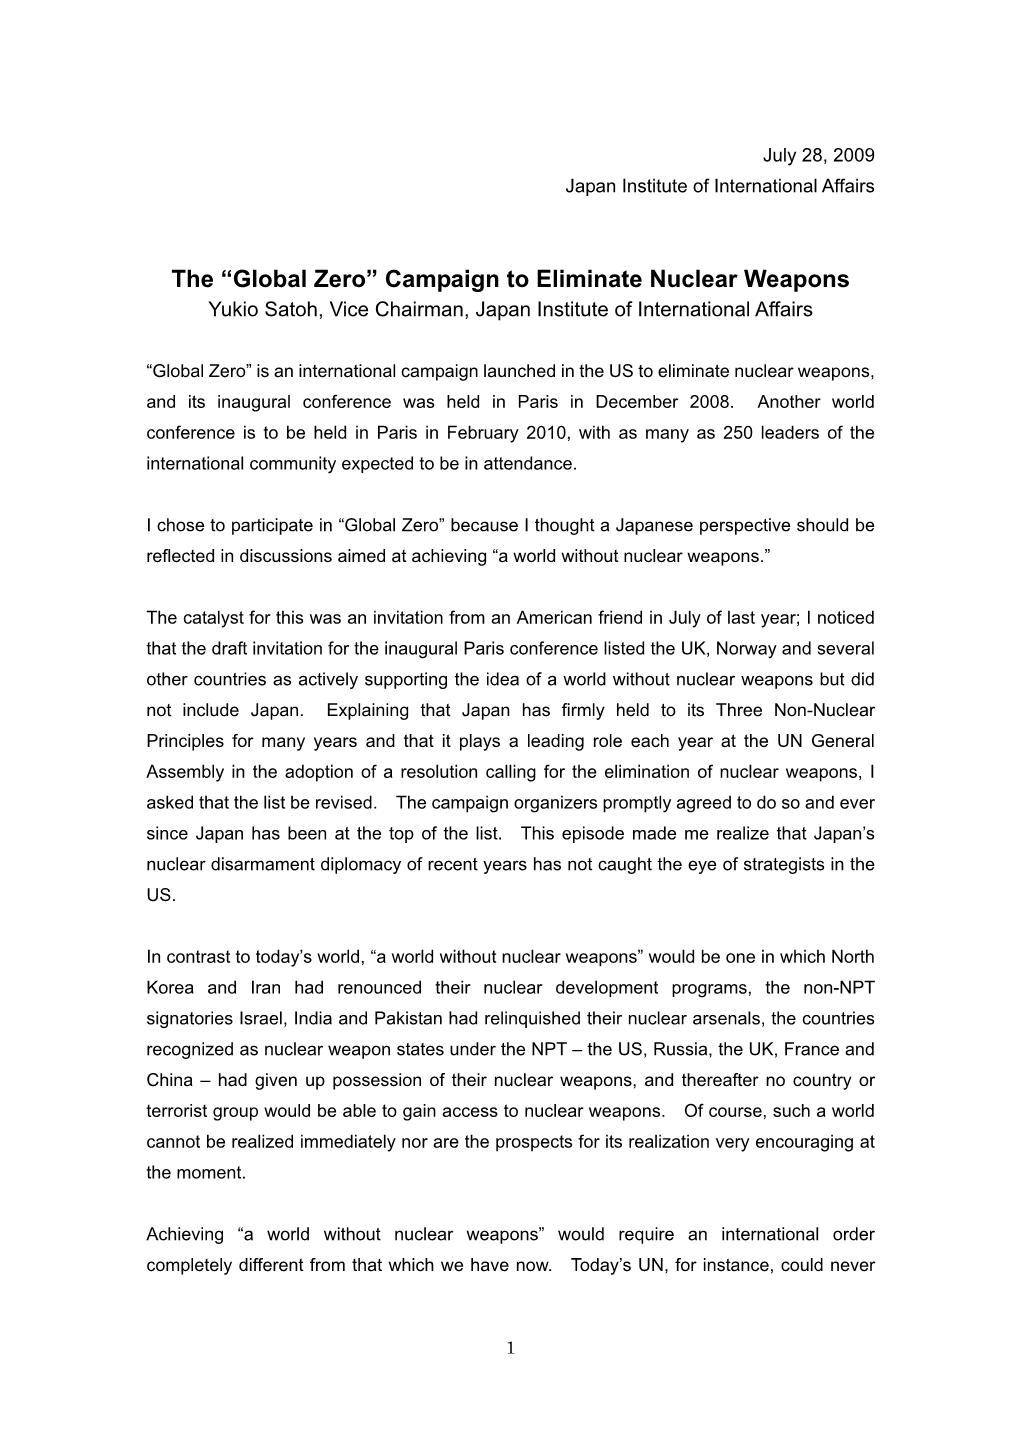 The “Global Zero” Campaign to Eliminate Nuclear Weapons Yukio Satoh, Vice Chairman, Japan Institute of International Affairs